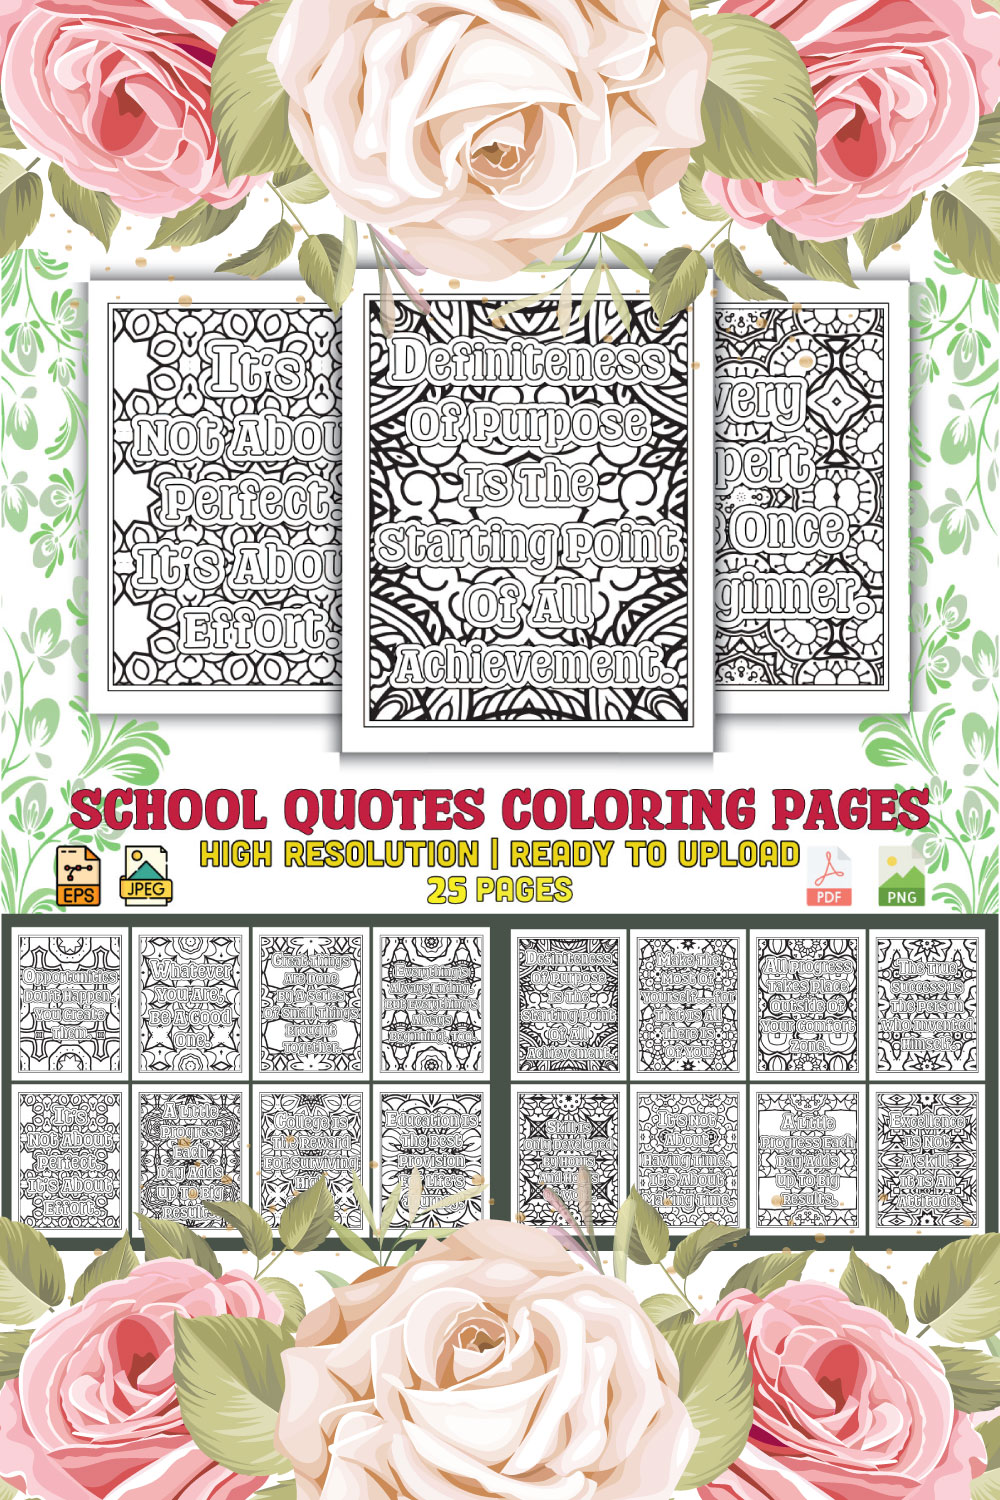 School Quotes Coloring Pages pinterest preview image.